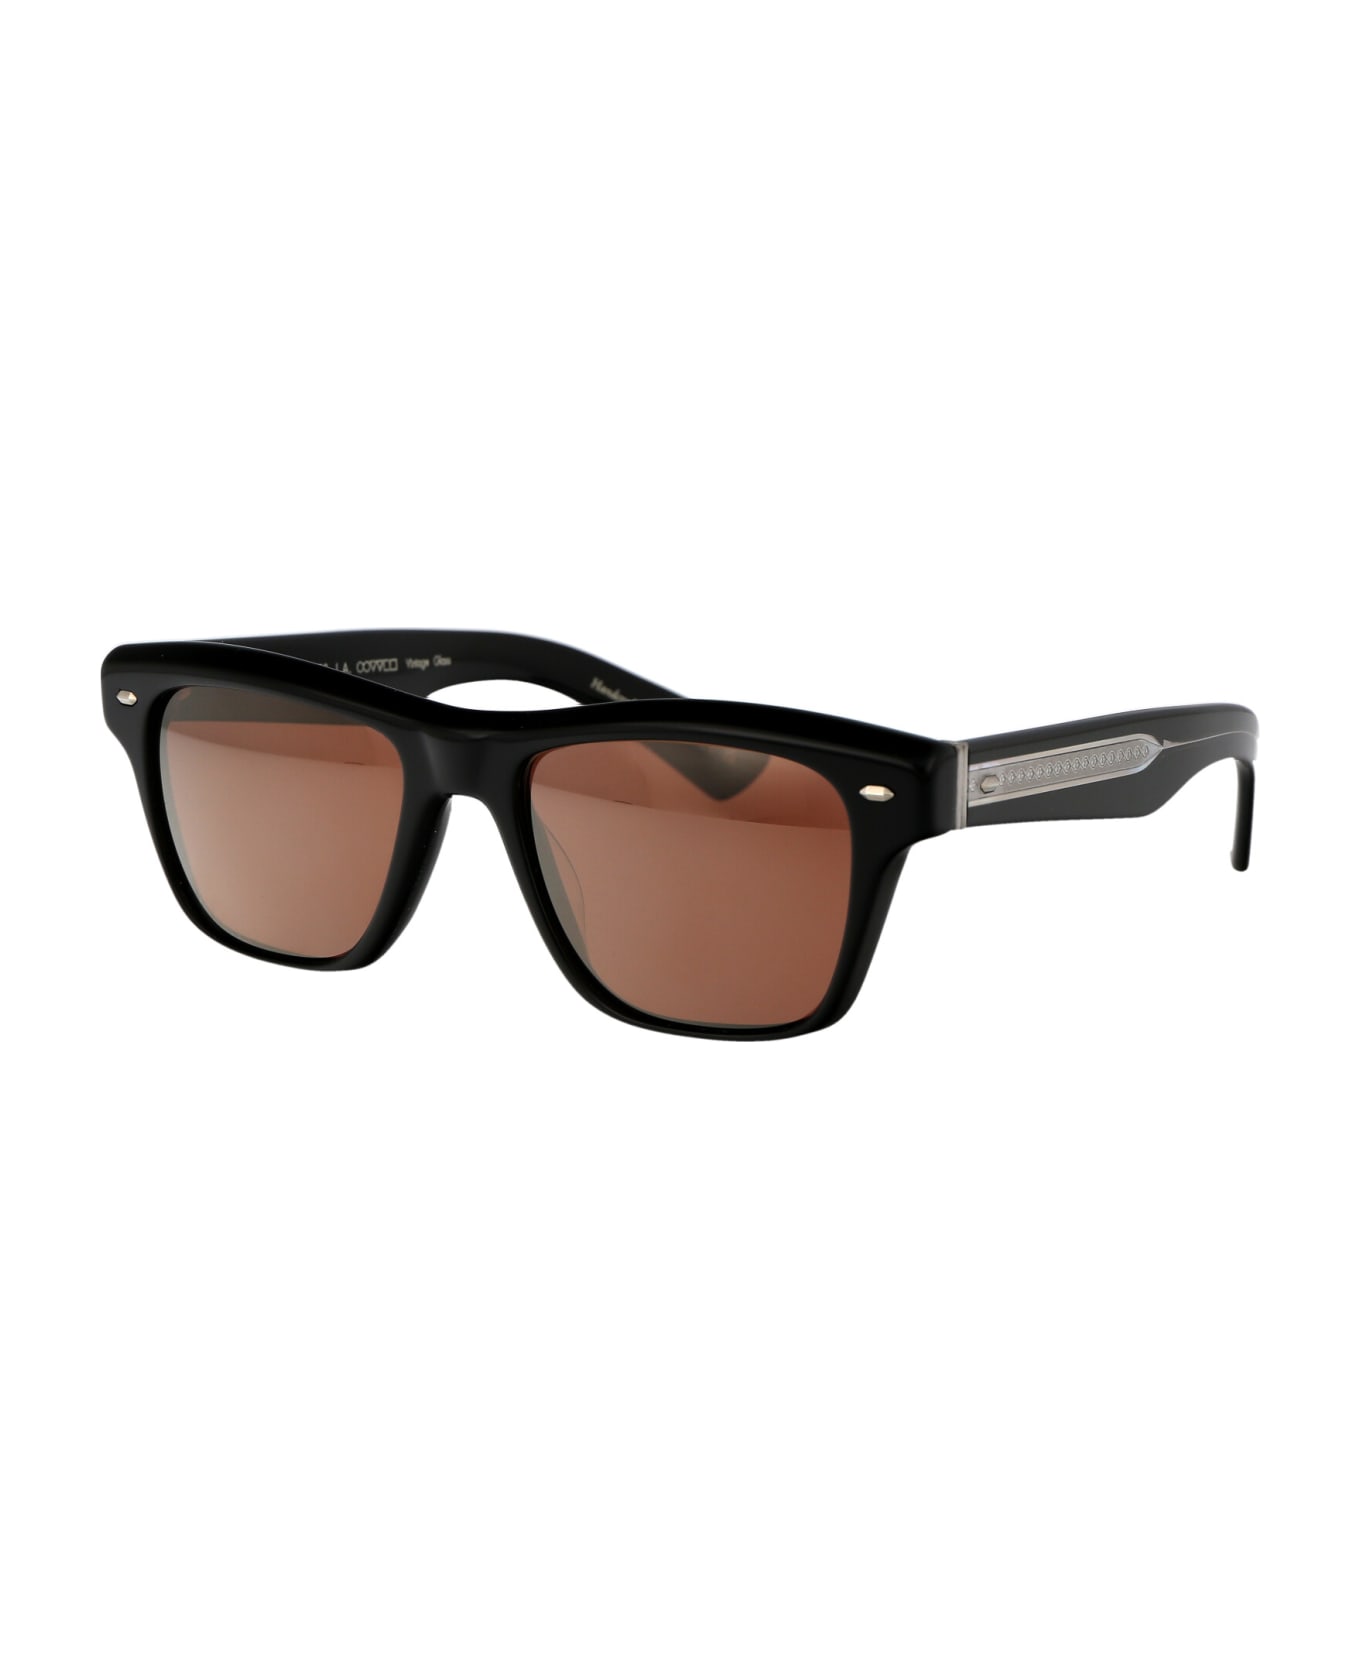 Oliver Peoples Oliver Sixties Sun Sunglasses - 1492W4 Black